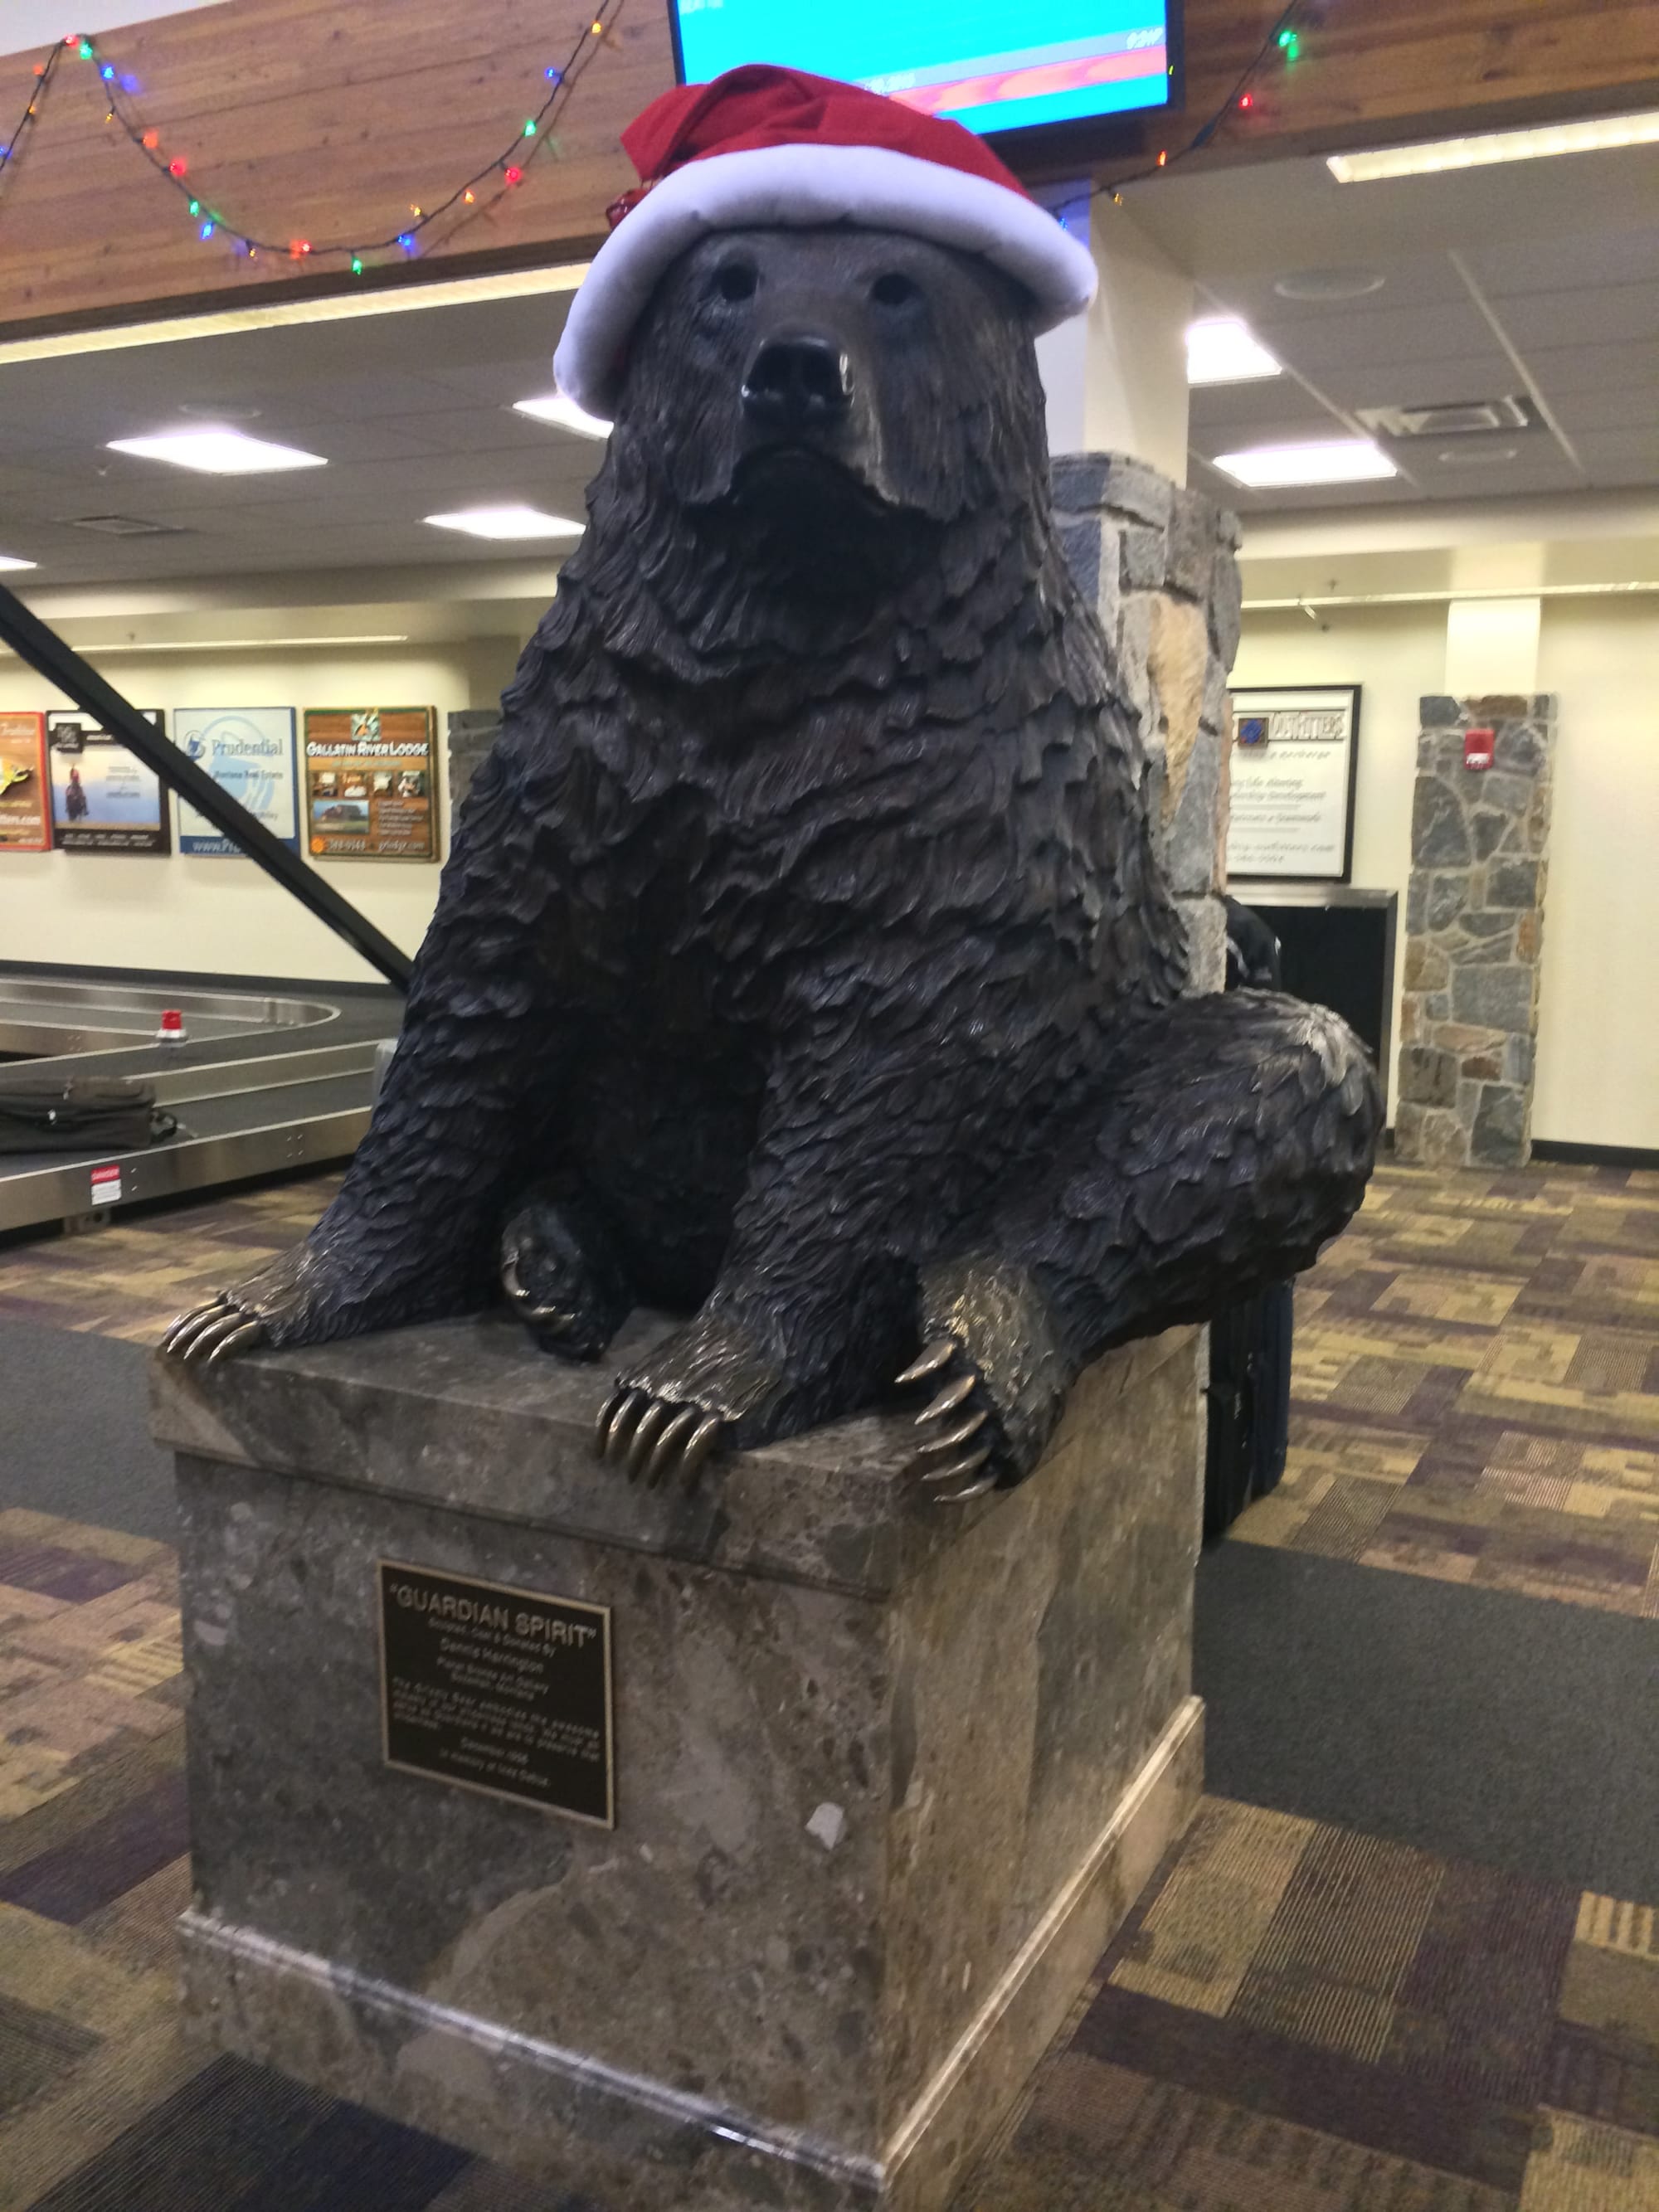 Photo by Author — I wonder if the bear wears the hat all year or just for the Christmas period — Bozeman Montana Airport